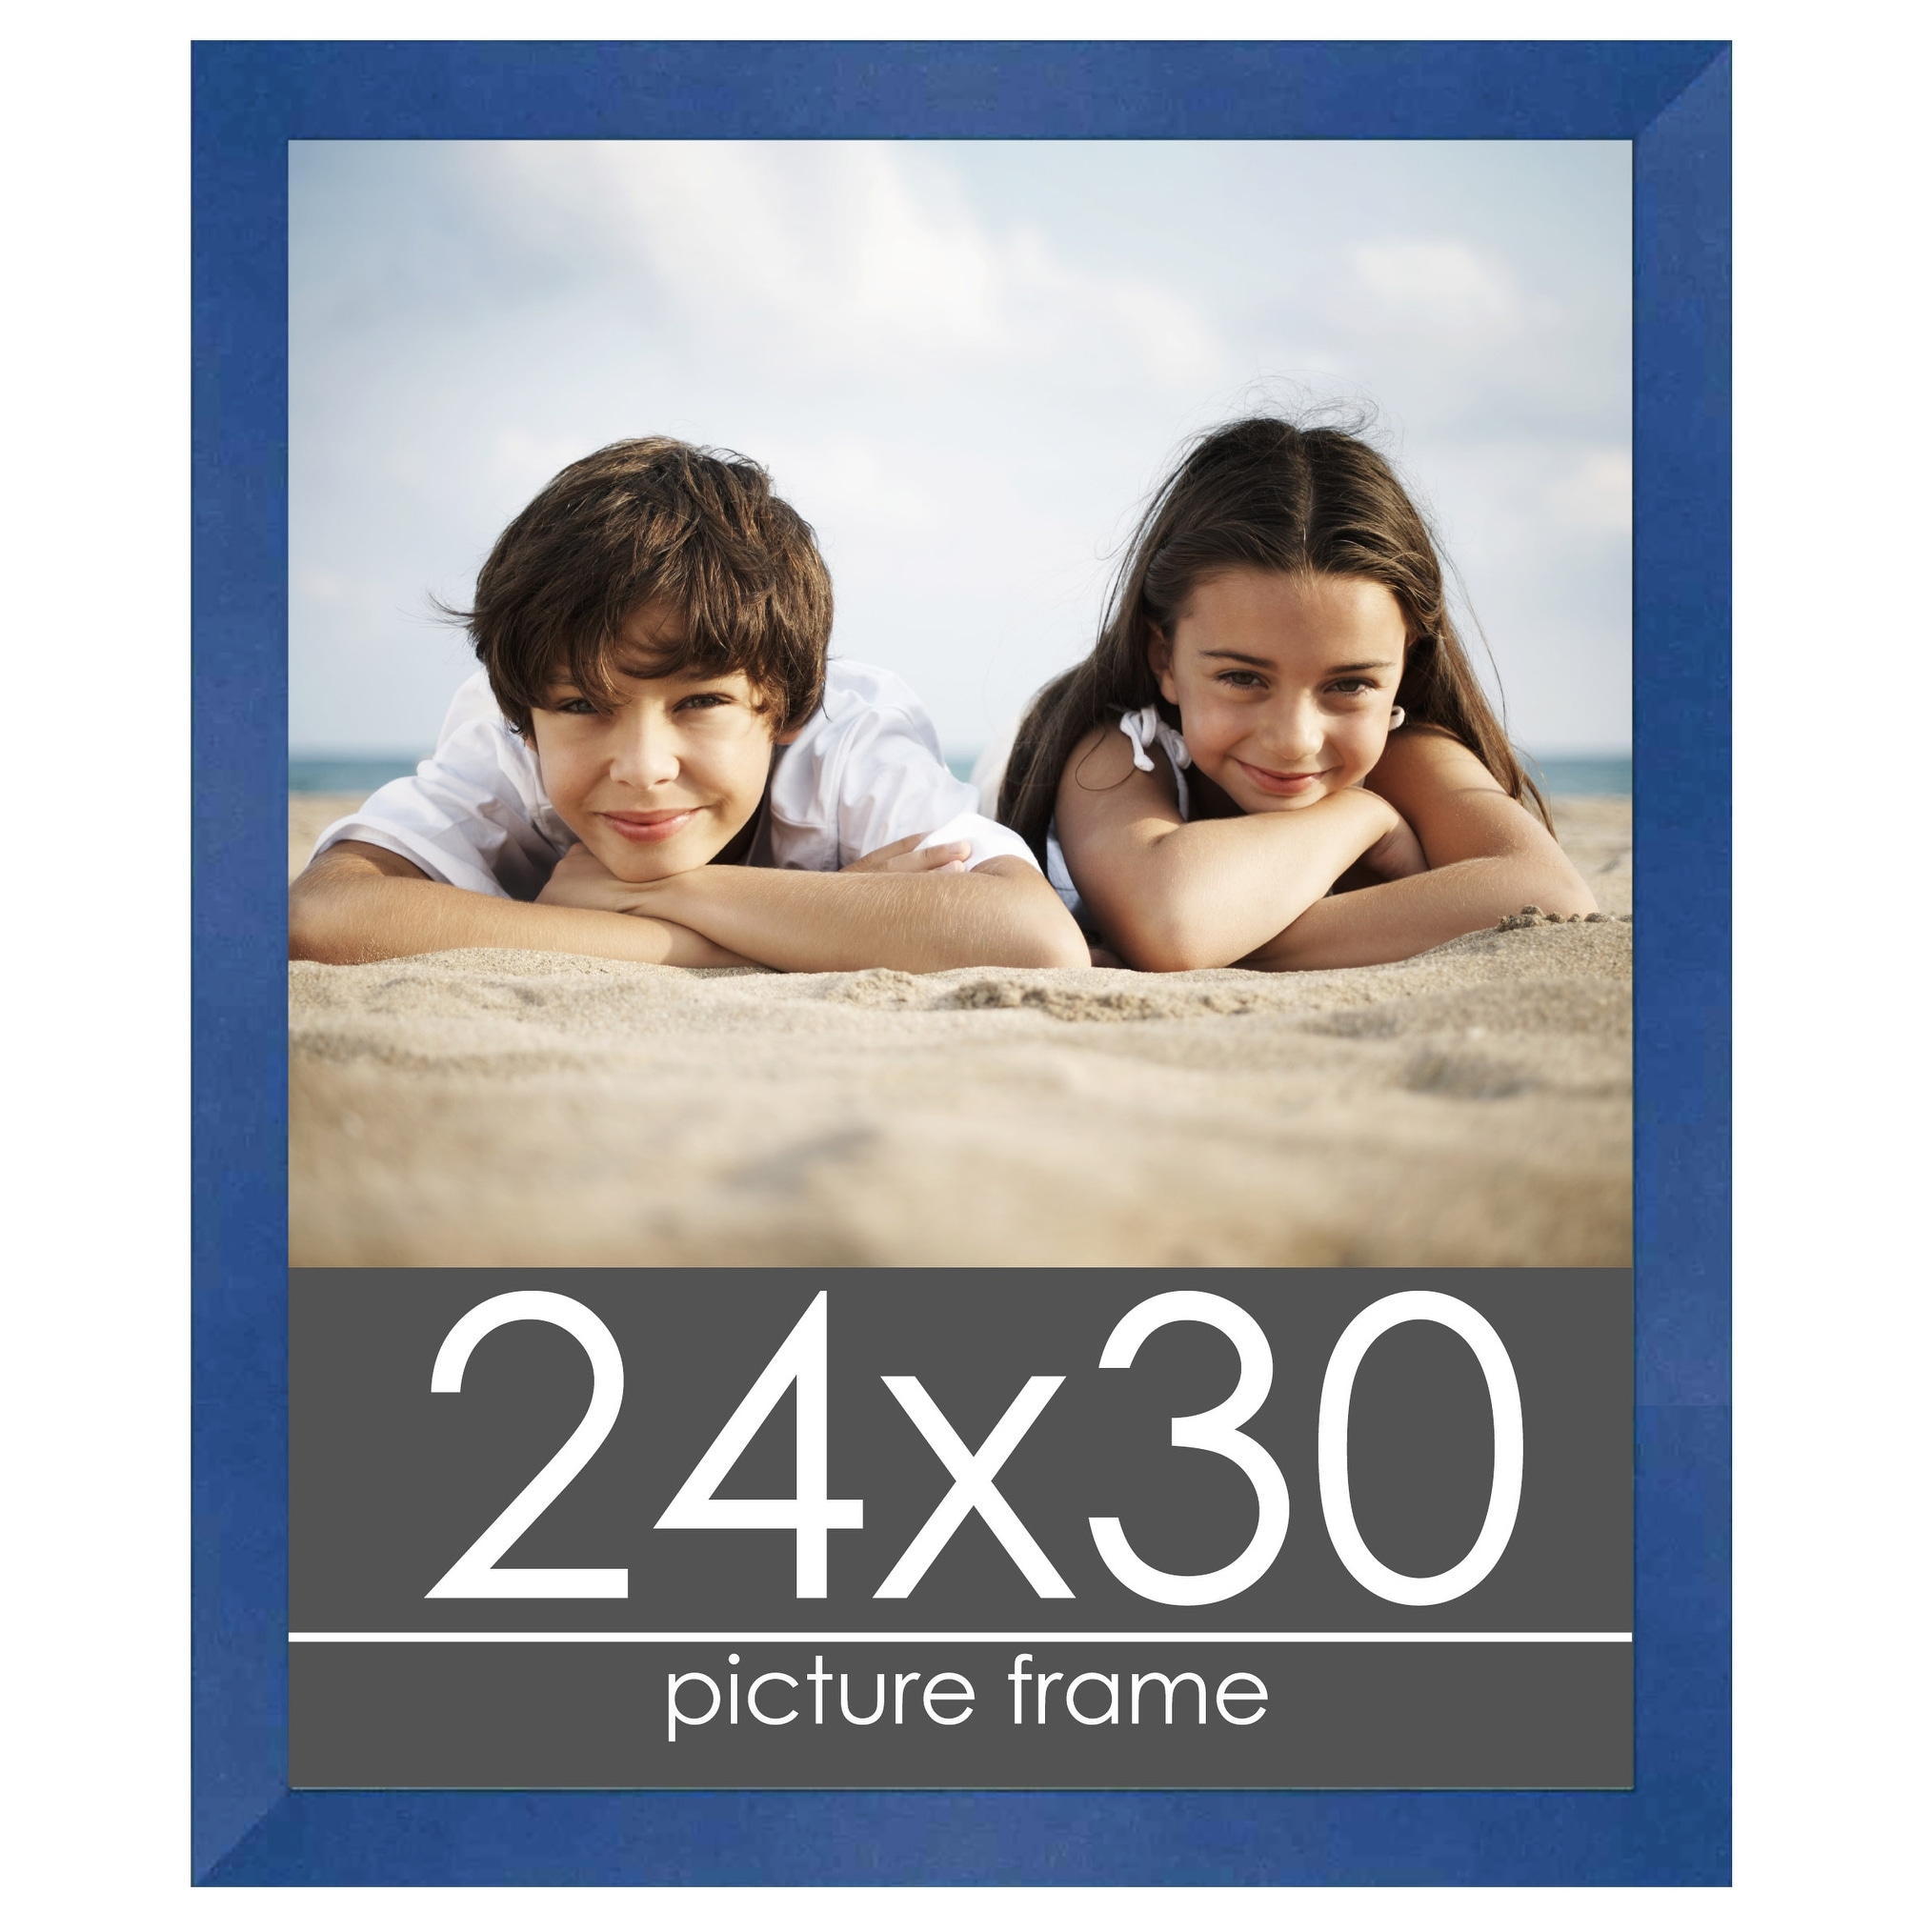 CustomPictureFrames 24x30 Classic Brown Wood Picture Frame - with Acrylic Front and Foam Board Backing